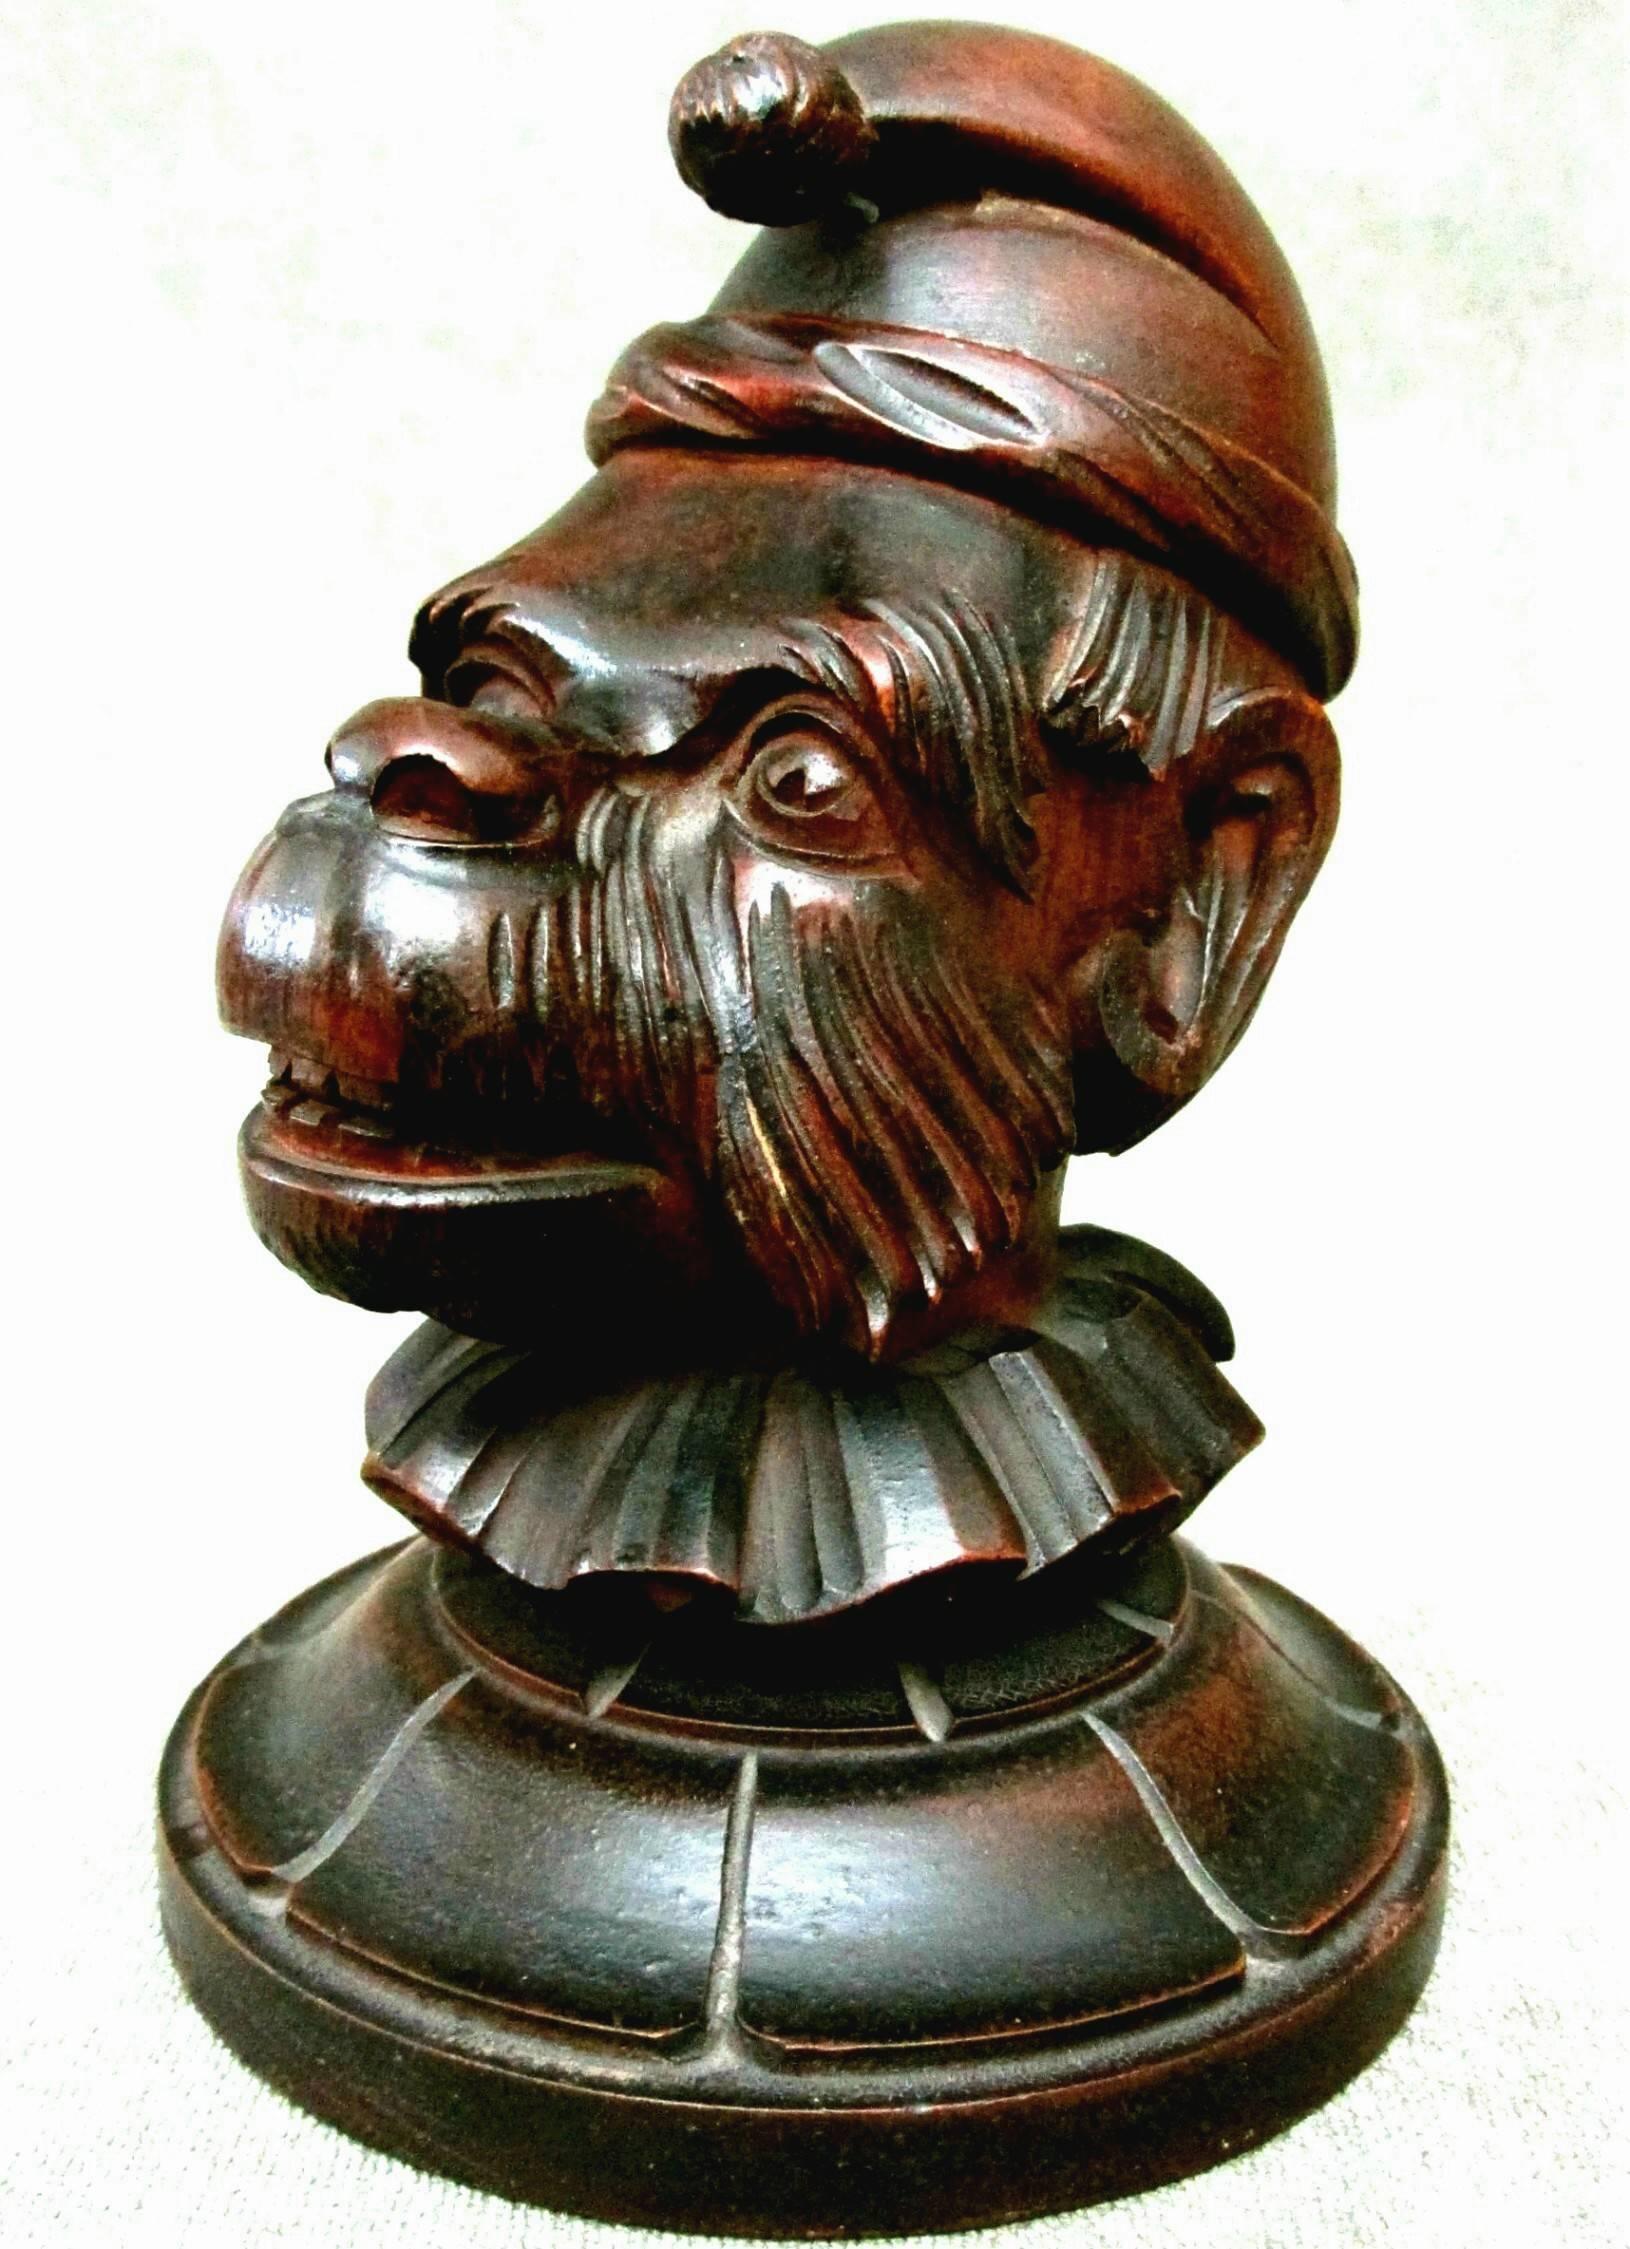 A very unusual if not unique tobacco humidor, showing a realistically carved monkey wearing a cap and a ruffled collar, the face rendered with an amusing expressive grin, the hinged cap opening to a recessed interior. Both ears are pierced